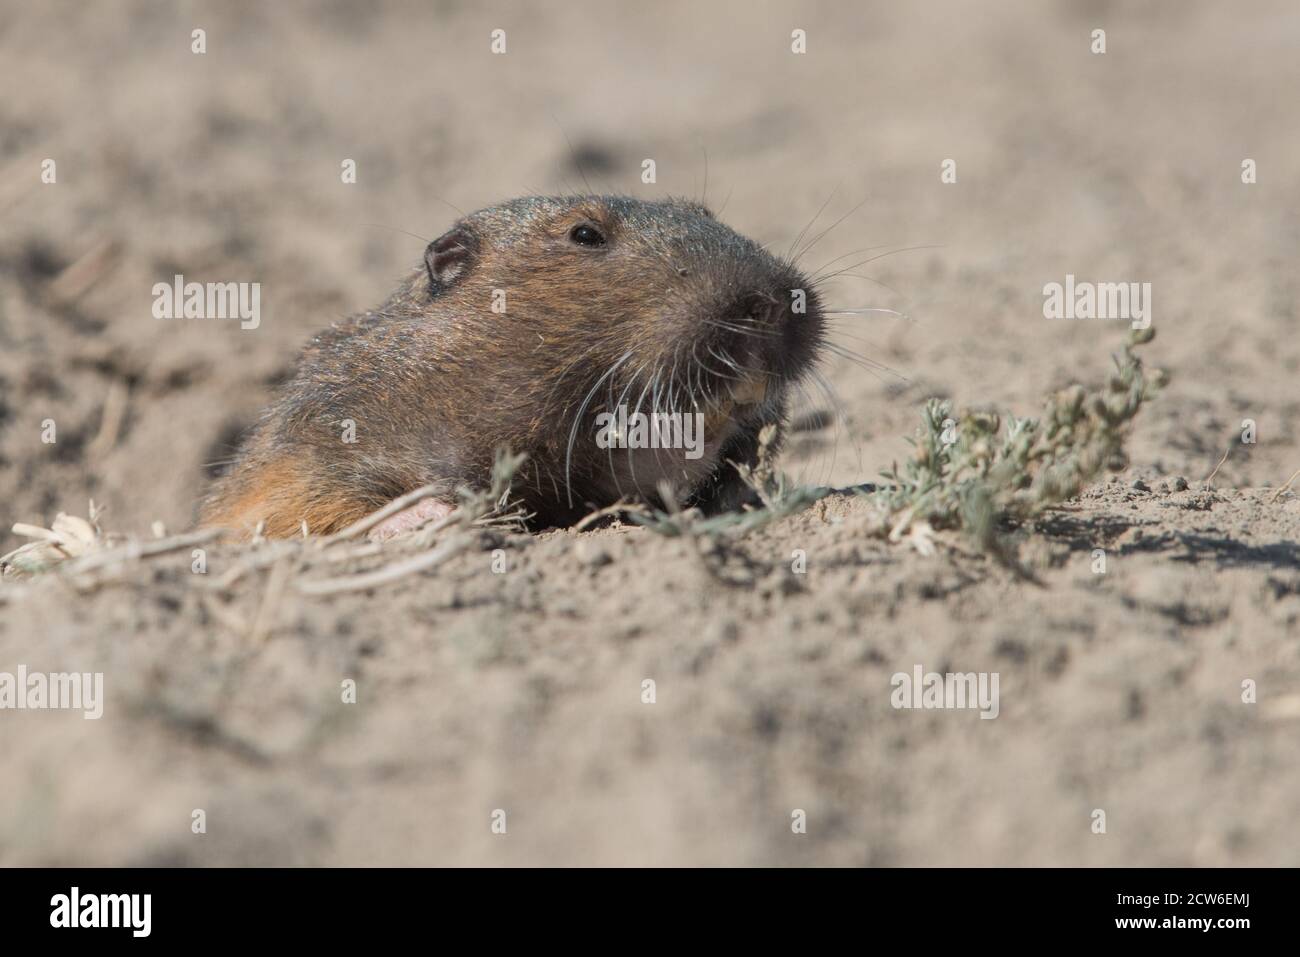 A Botta's pocket gopher (Thomomys bottae) peeking out of its burrow in the East Bay hills of Briones Regional Park in Northern California. Stock Photo